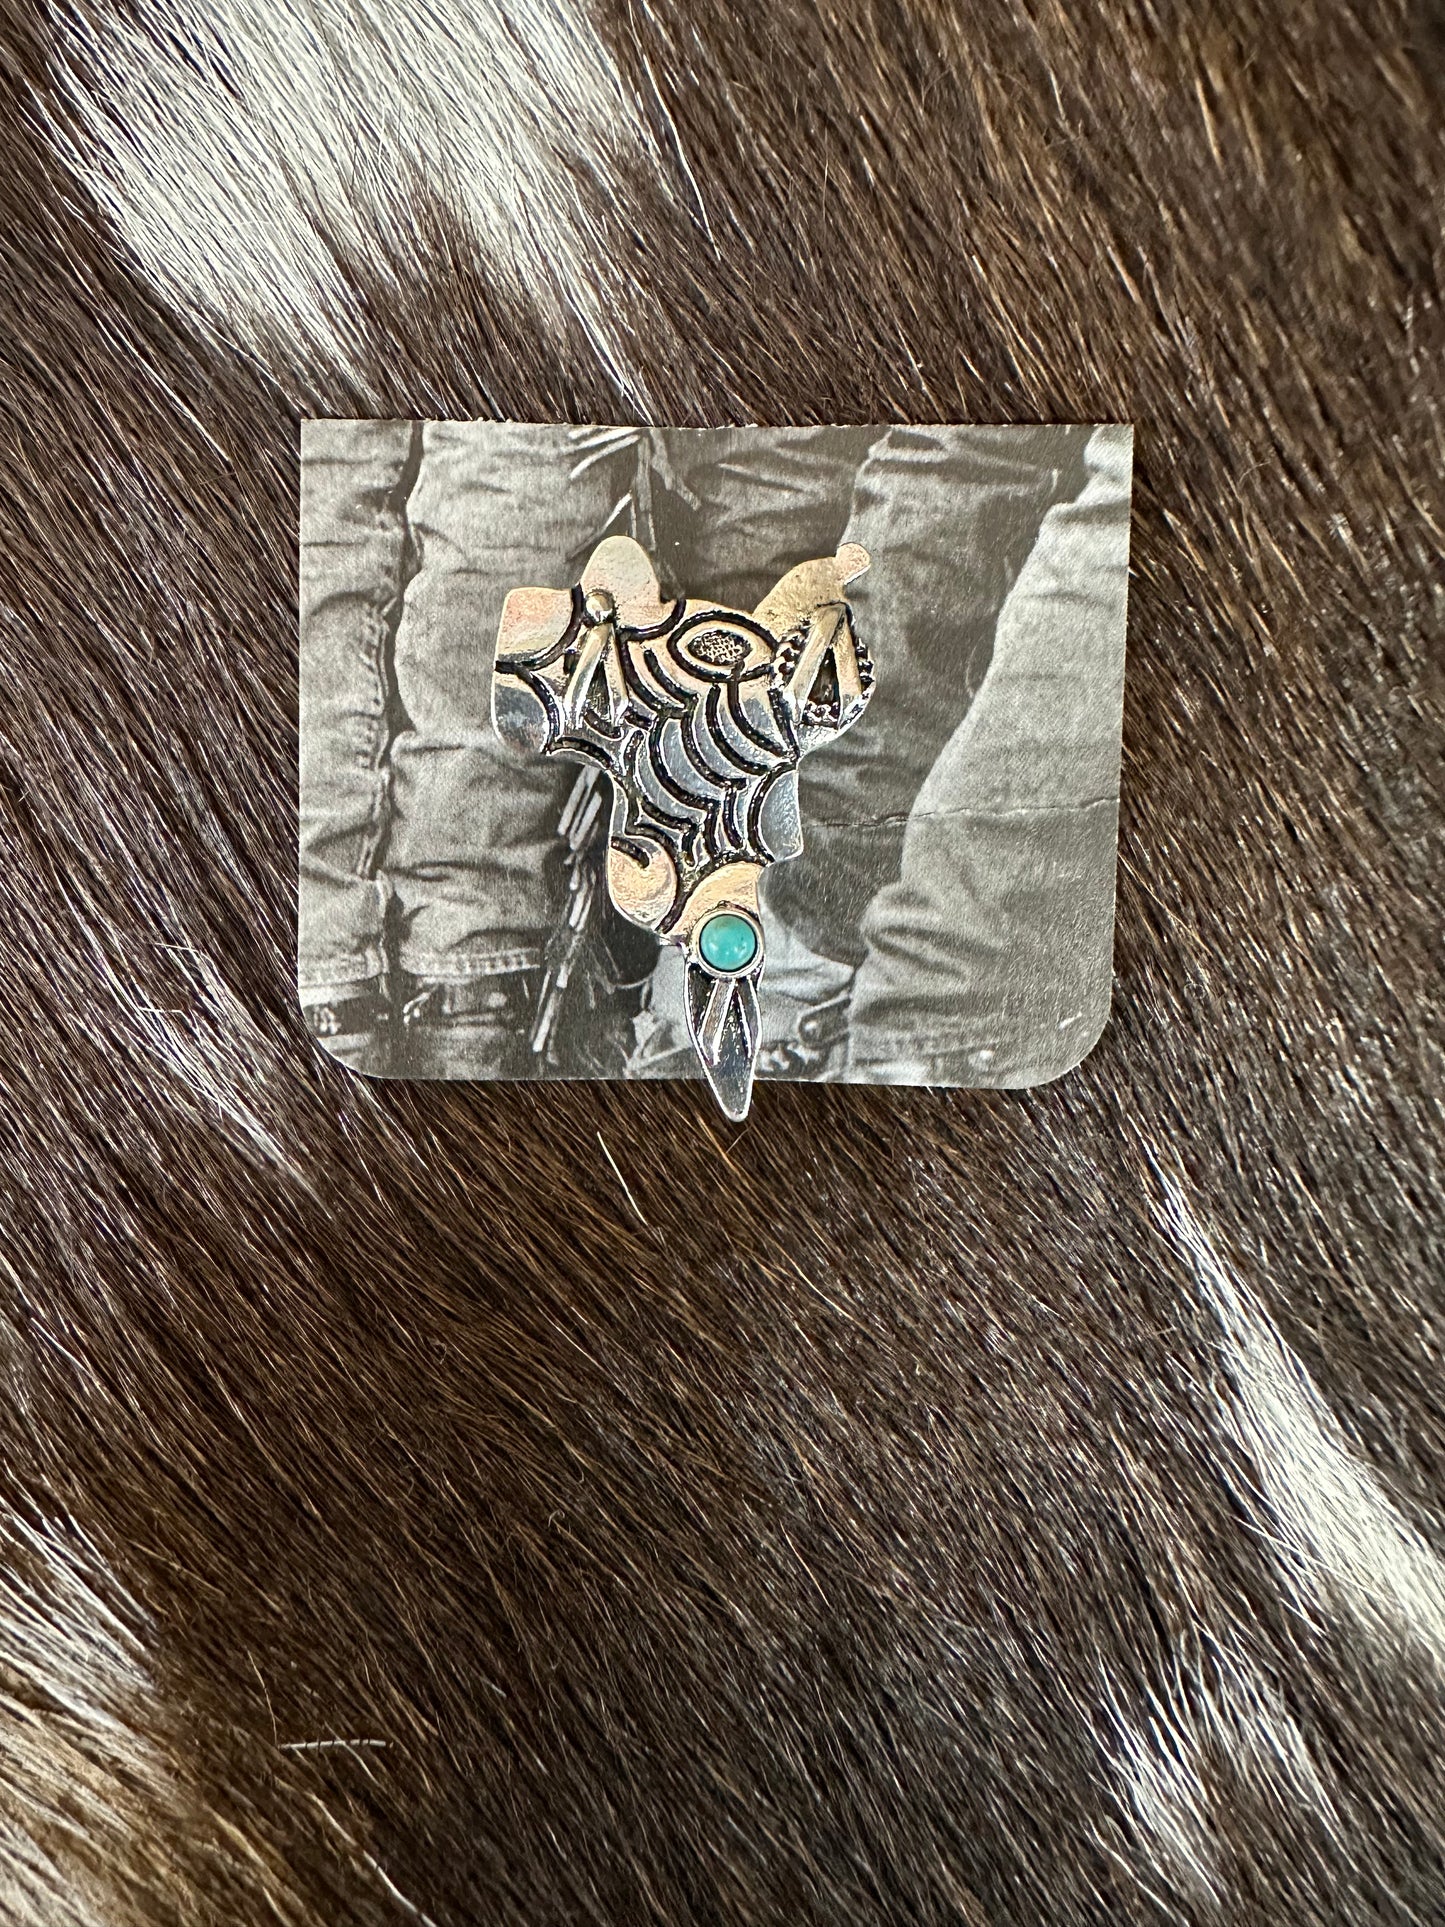 The Saddle Up Hat Pin